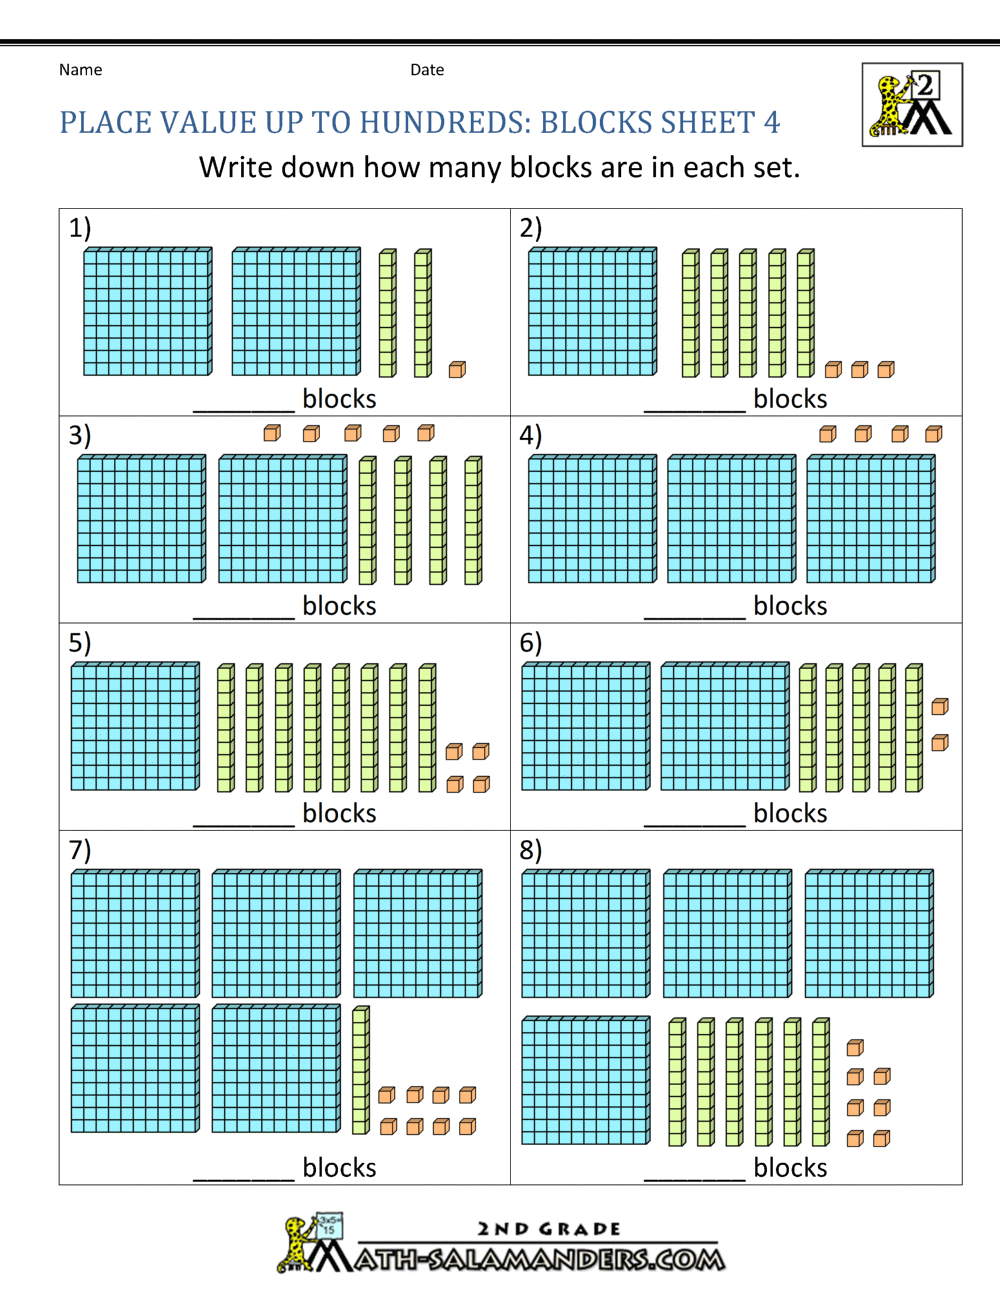 Place Value Blocks with 3 digit number